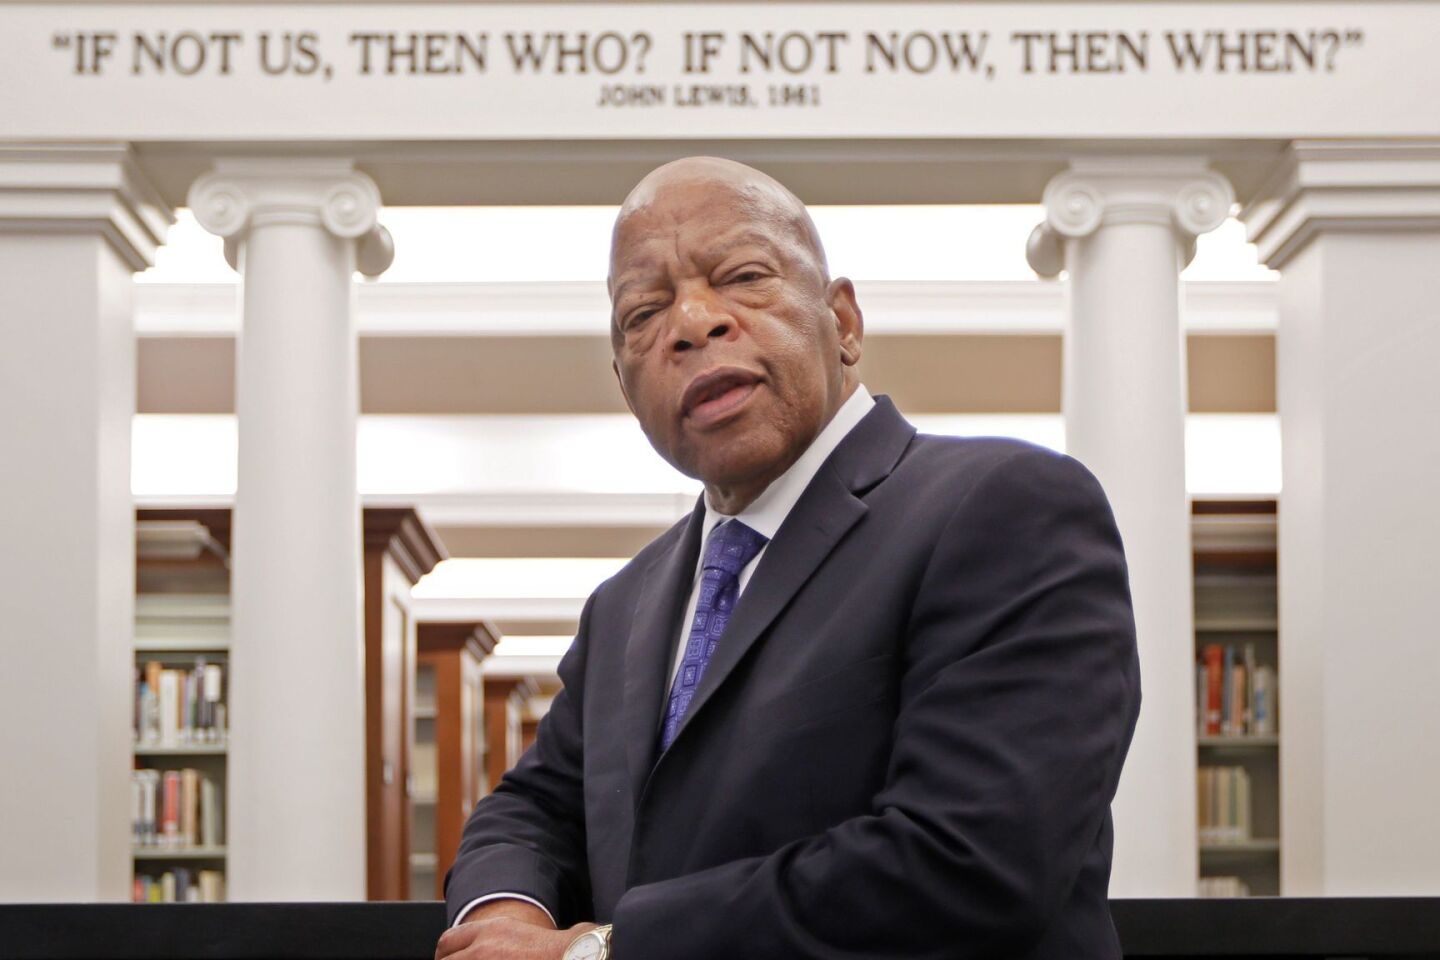 Rep. John Lewis famously shed his blood at the foot of a Selma, Ala., bridge in a 1965 demonstration for Black voting rights, and went on to become a 17-term Democratic member of Congress. An inspirational figure for decades, Lewis was one of the last survivors among members of the Rev. Martin Luther King Jr.’s inner circle. He was 80.